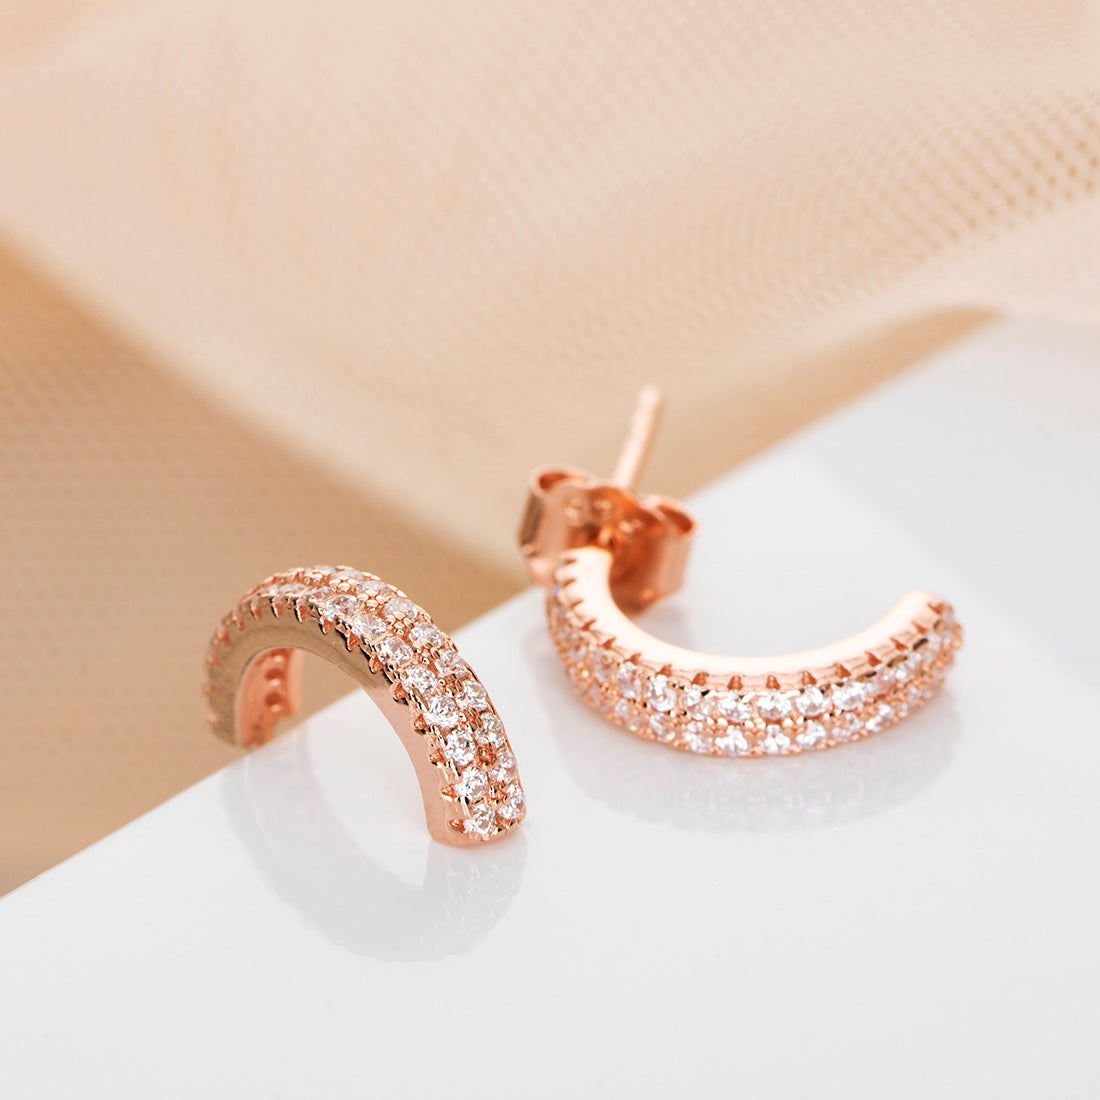 Chic Half Hoop Radiance Rose Gold-Plated CZ 925 Sterling Silver Earrings